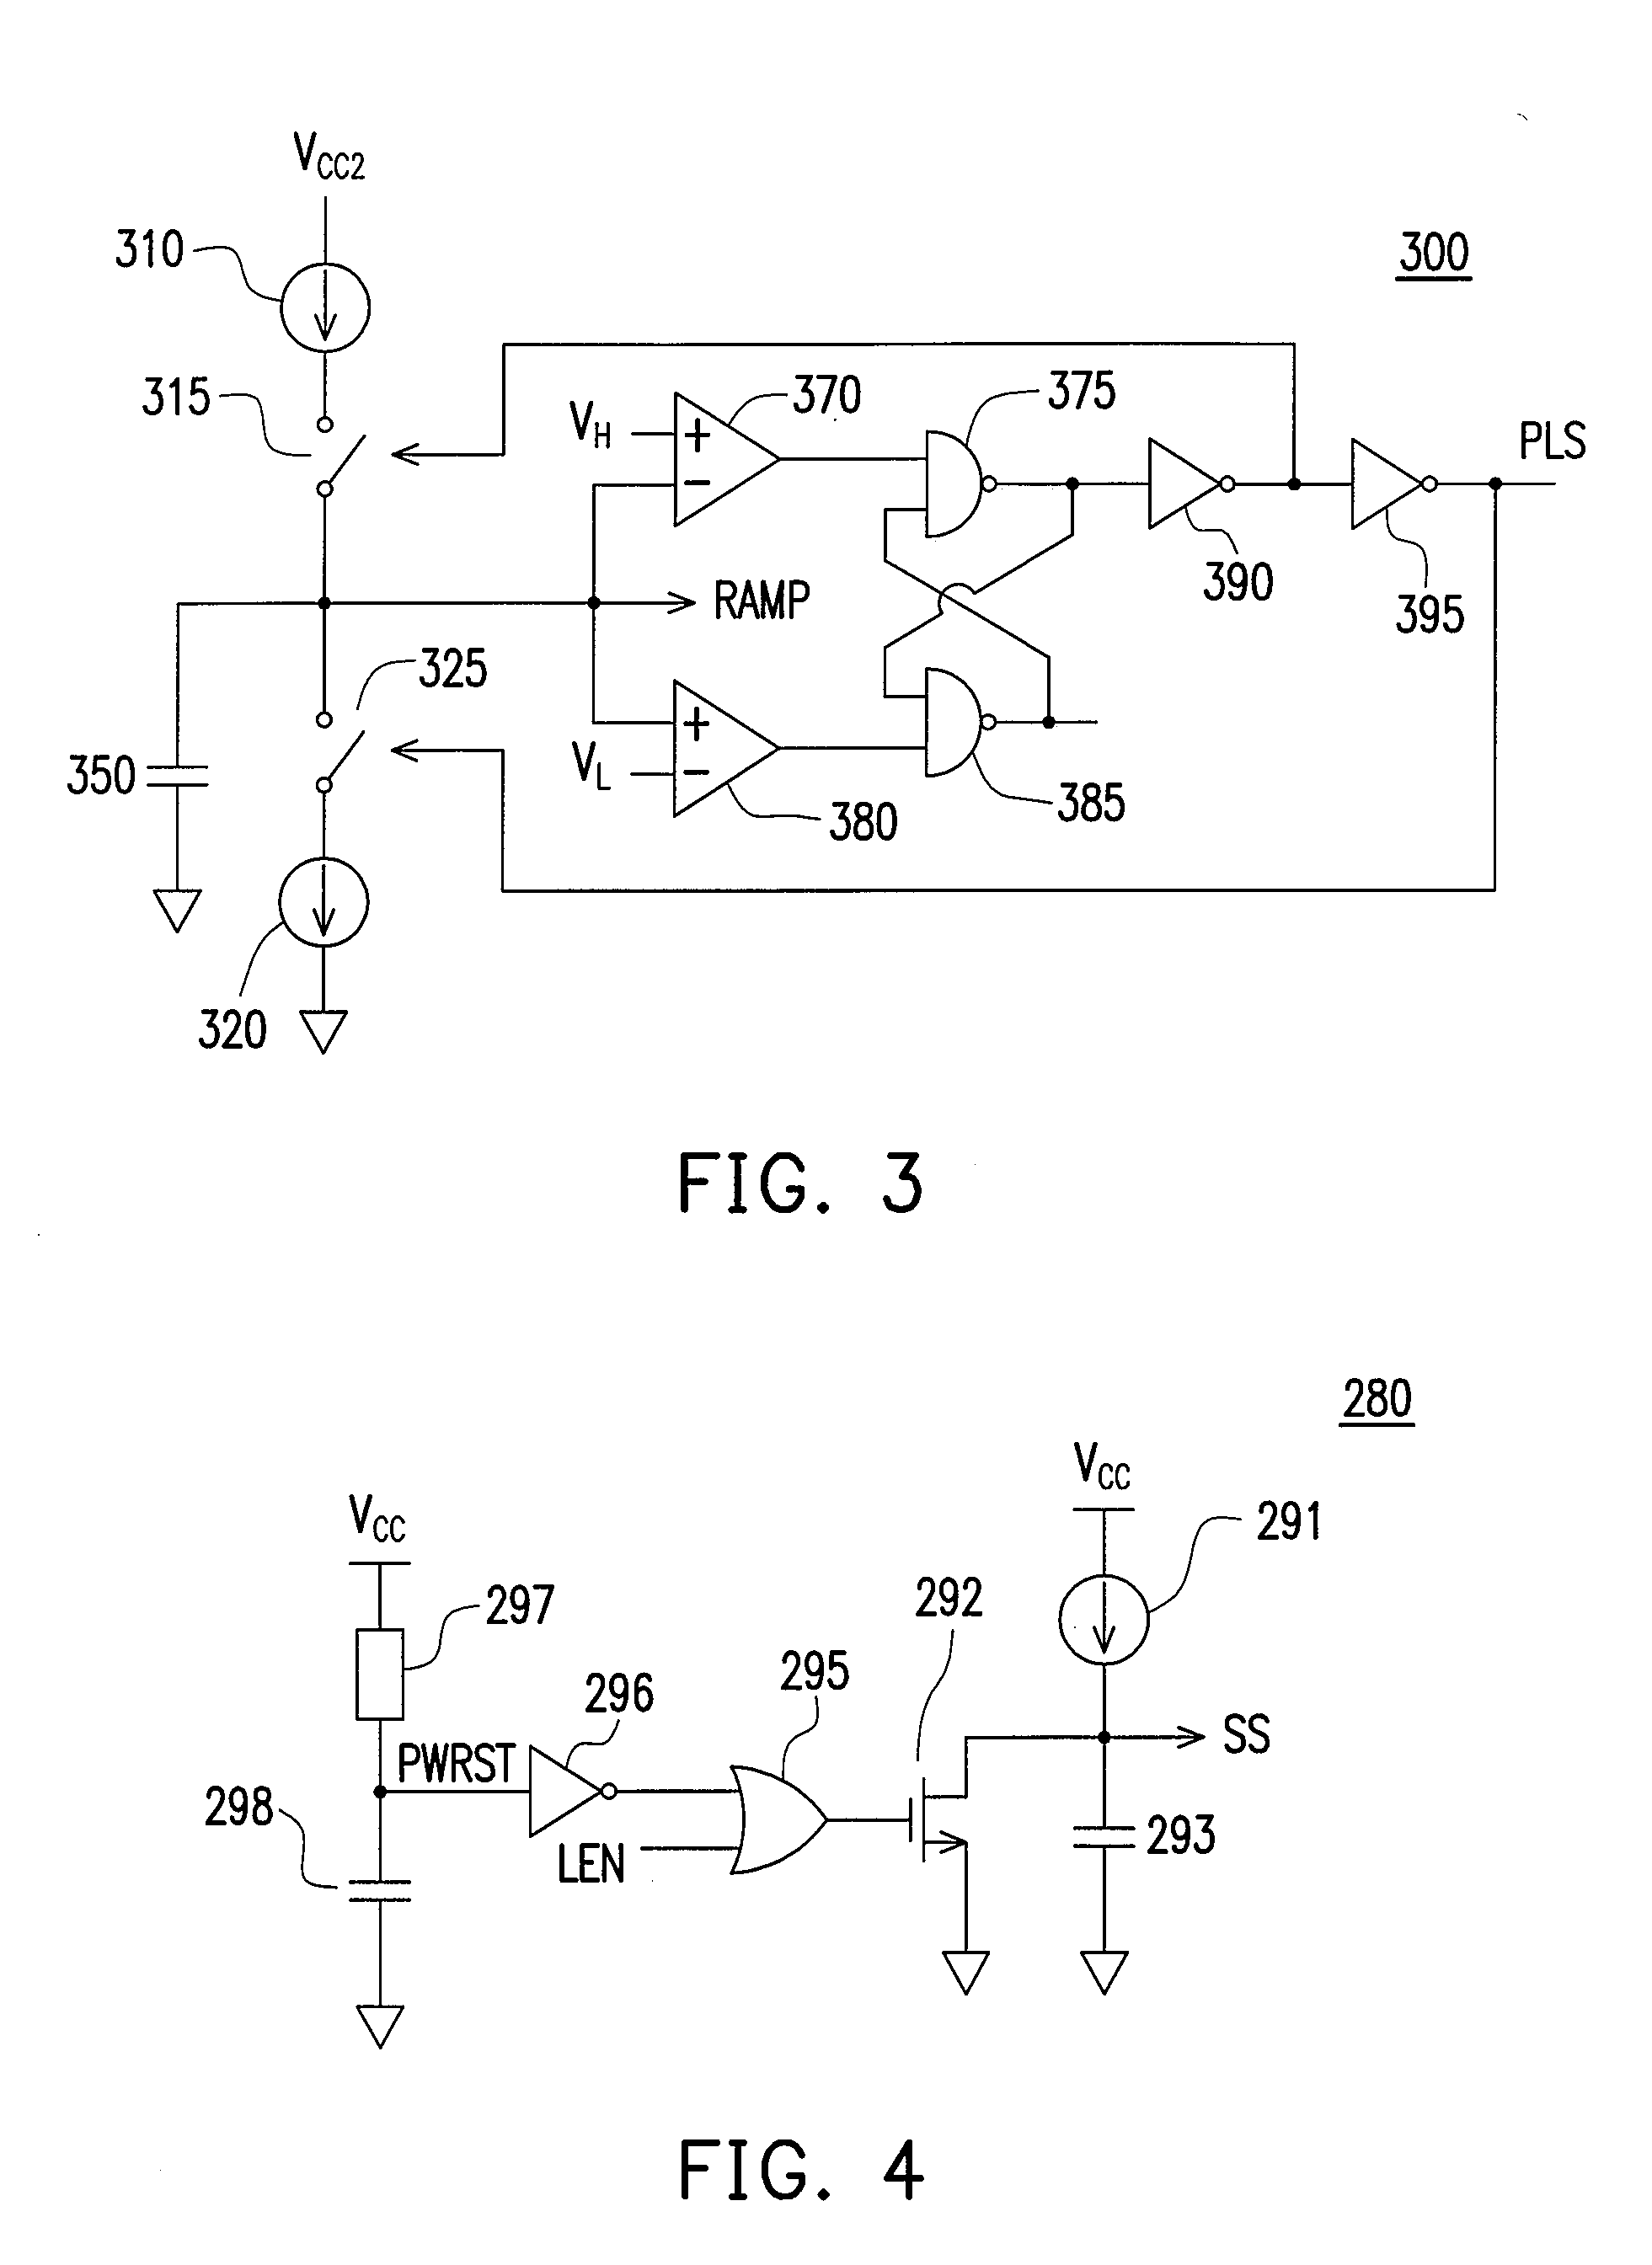 Controller with loop impedance modulation for power converter